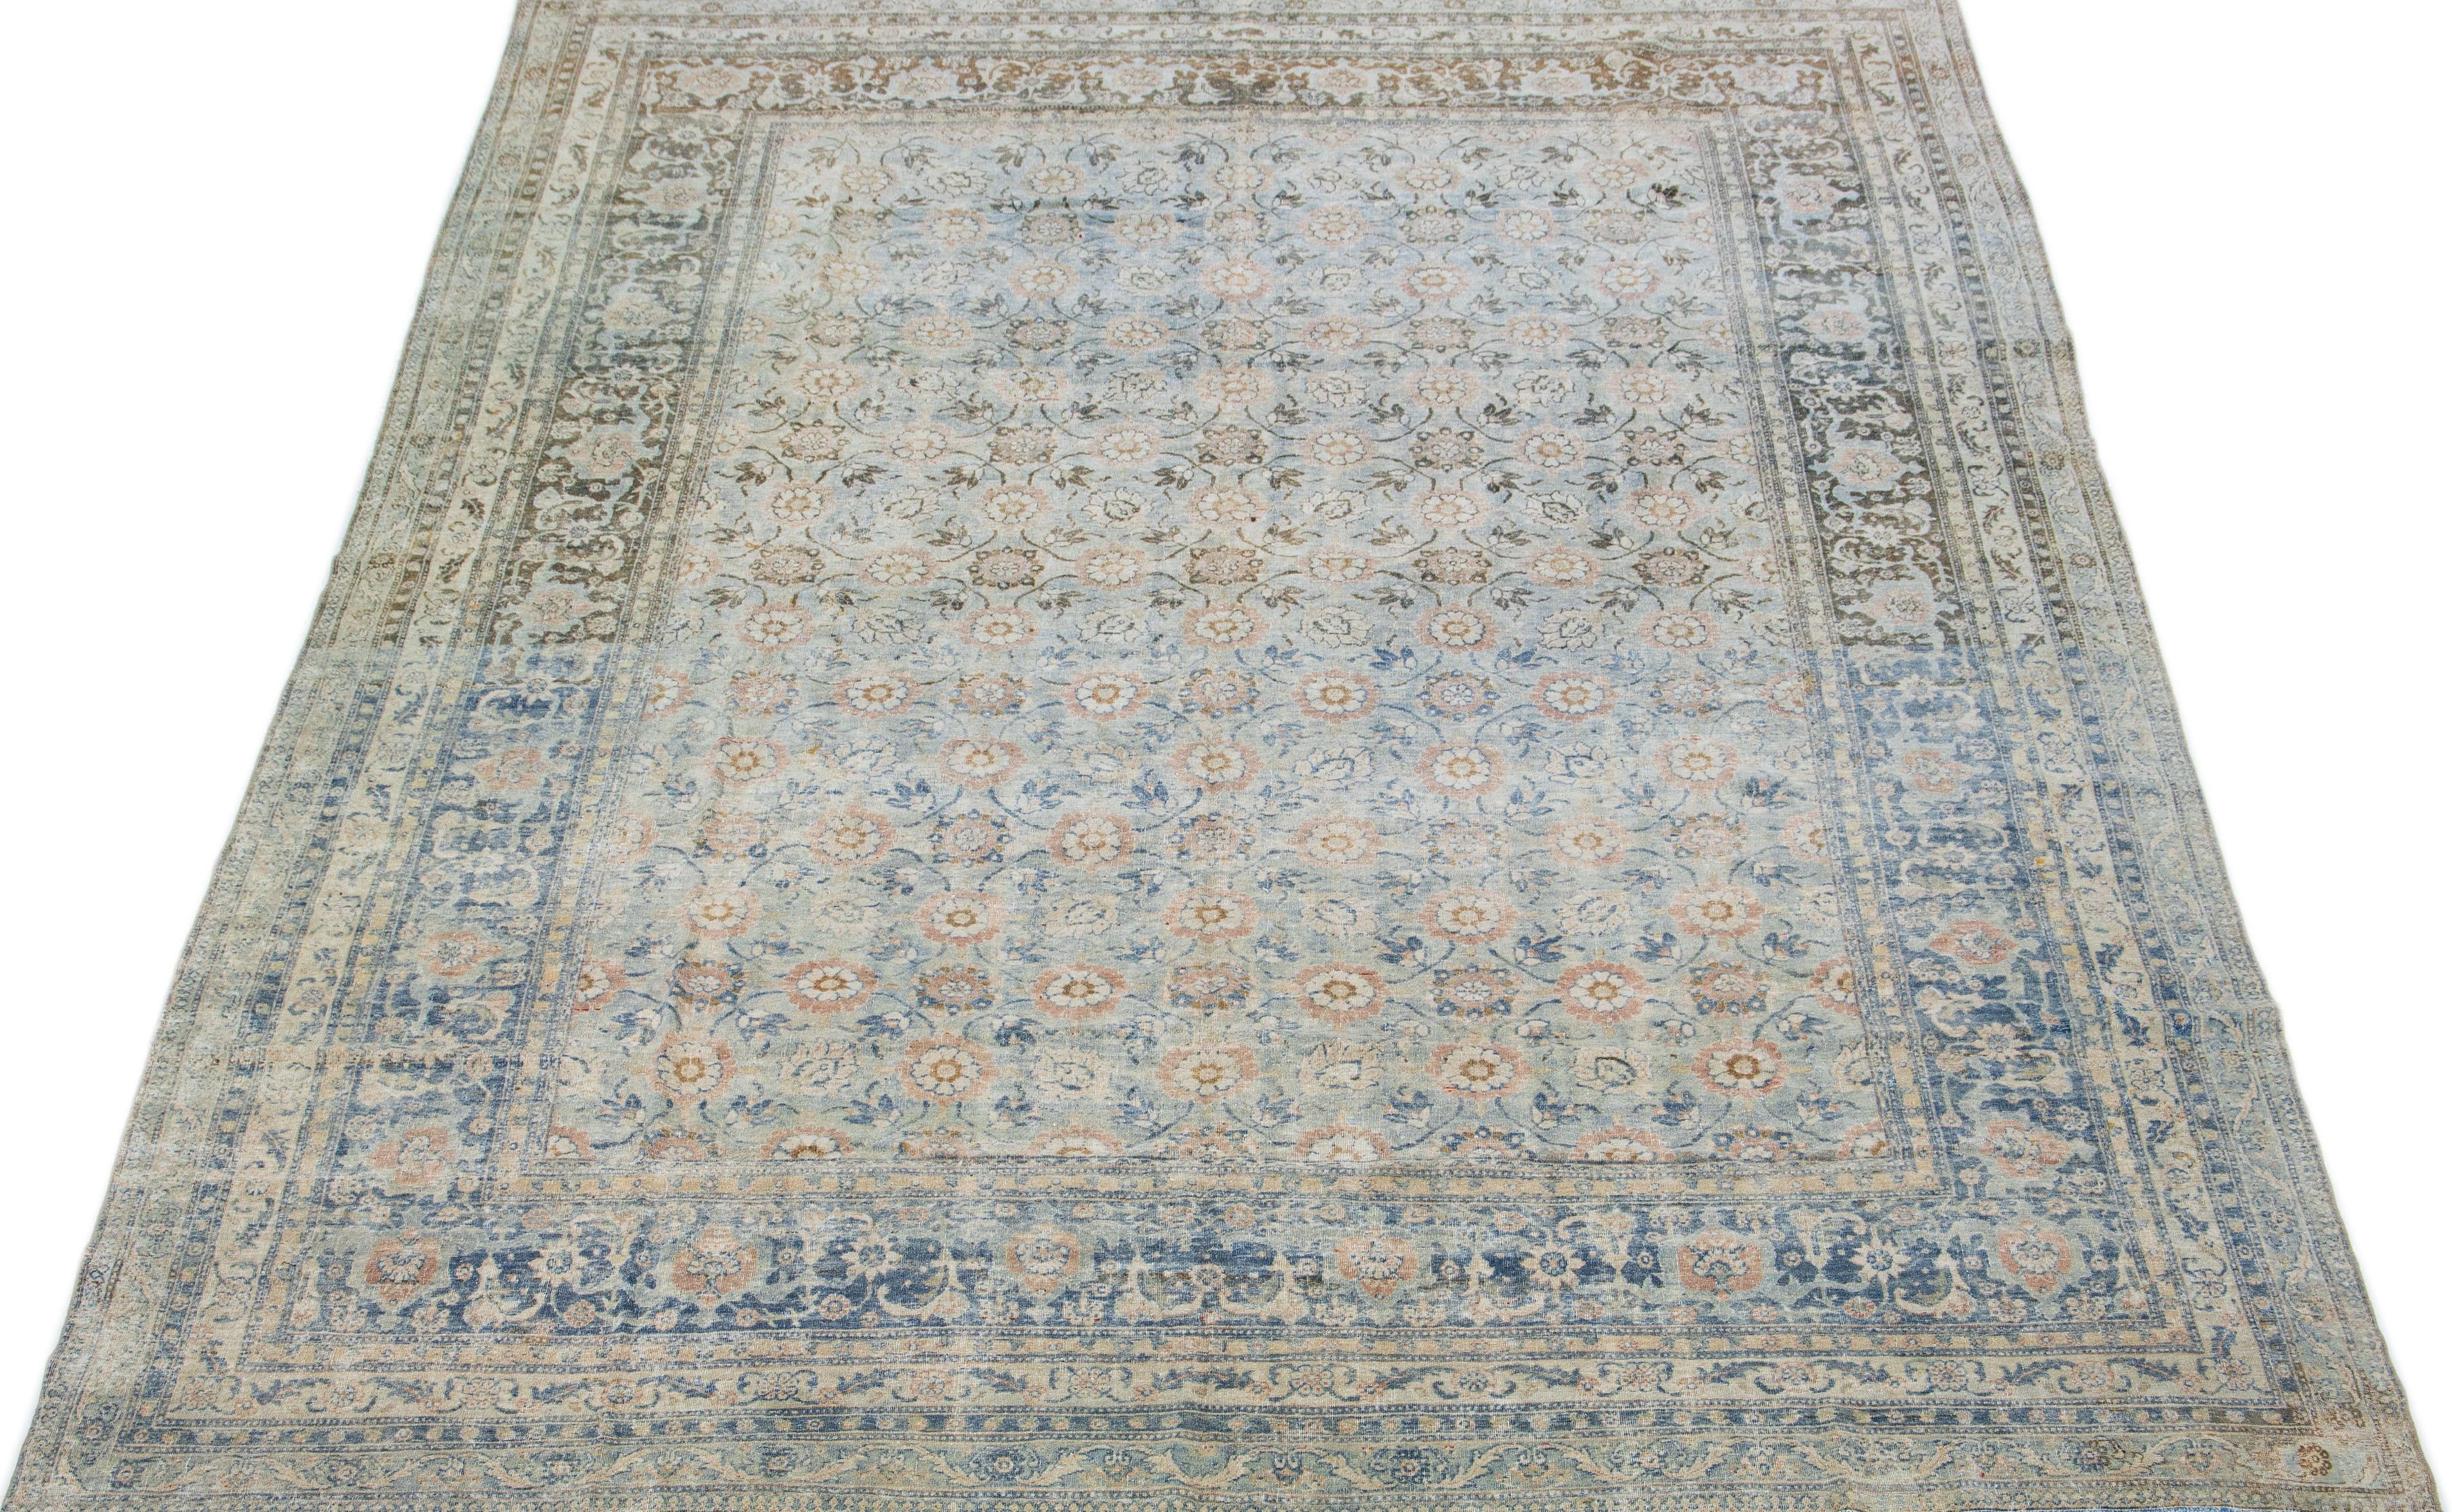 This stunning hand knotted Persian Tabriz wool rug has a light blue field and a gorgeous traditional Allover floral design featuring a peach accent. An antique masterpiece, this rug is a magnificent piece of art.

This rug measures 9.4